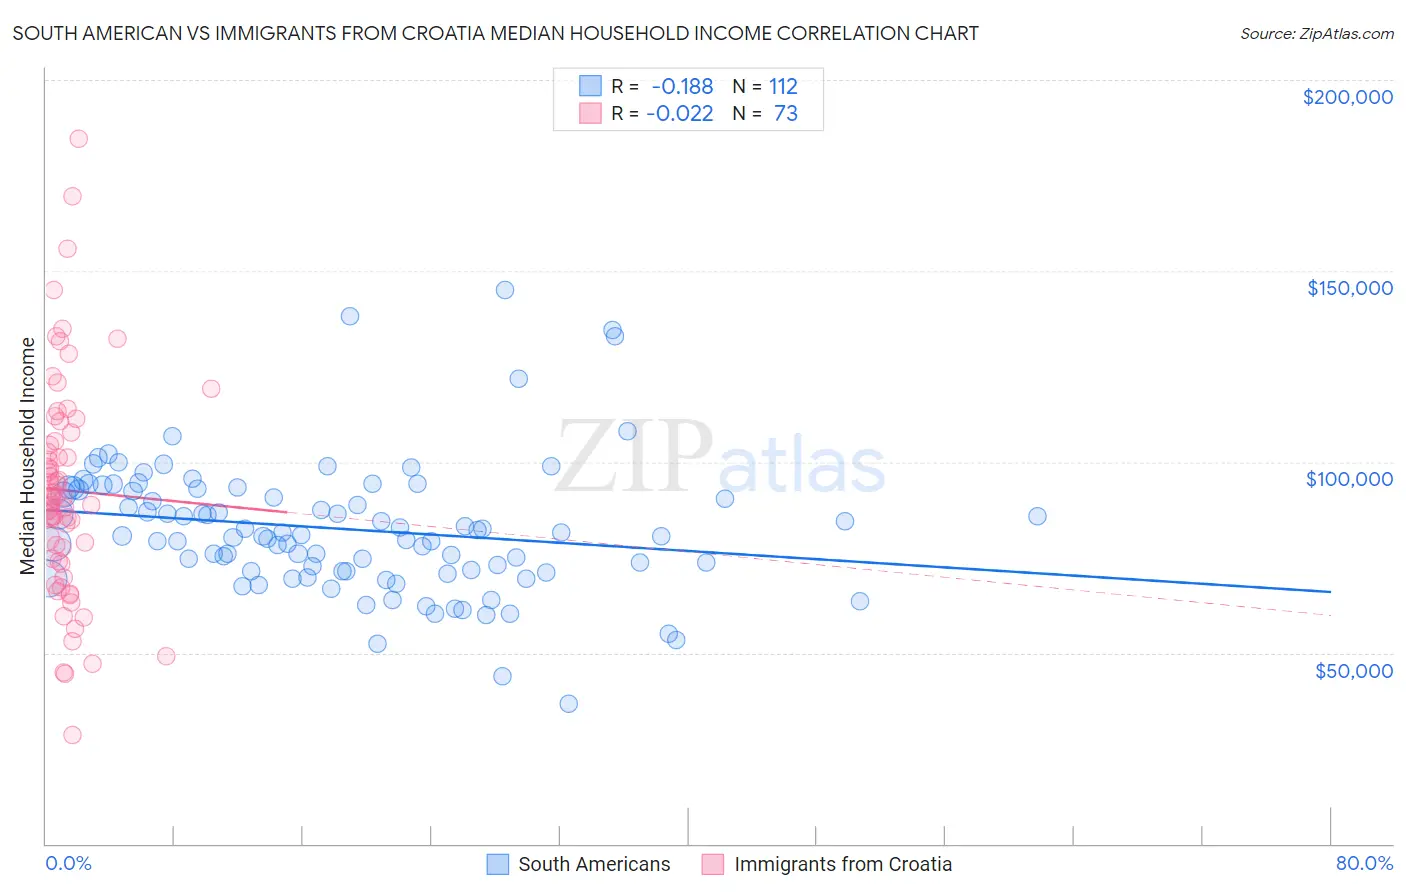 South American vs Immigrants from Croatia Median Household Income